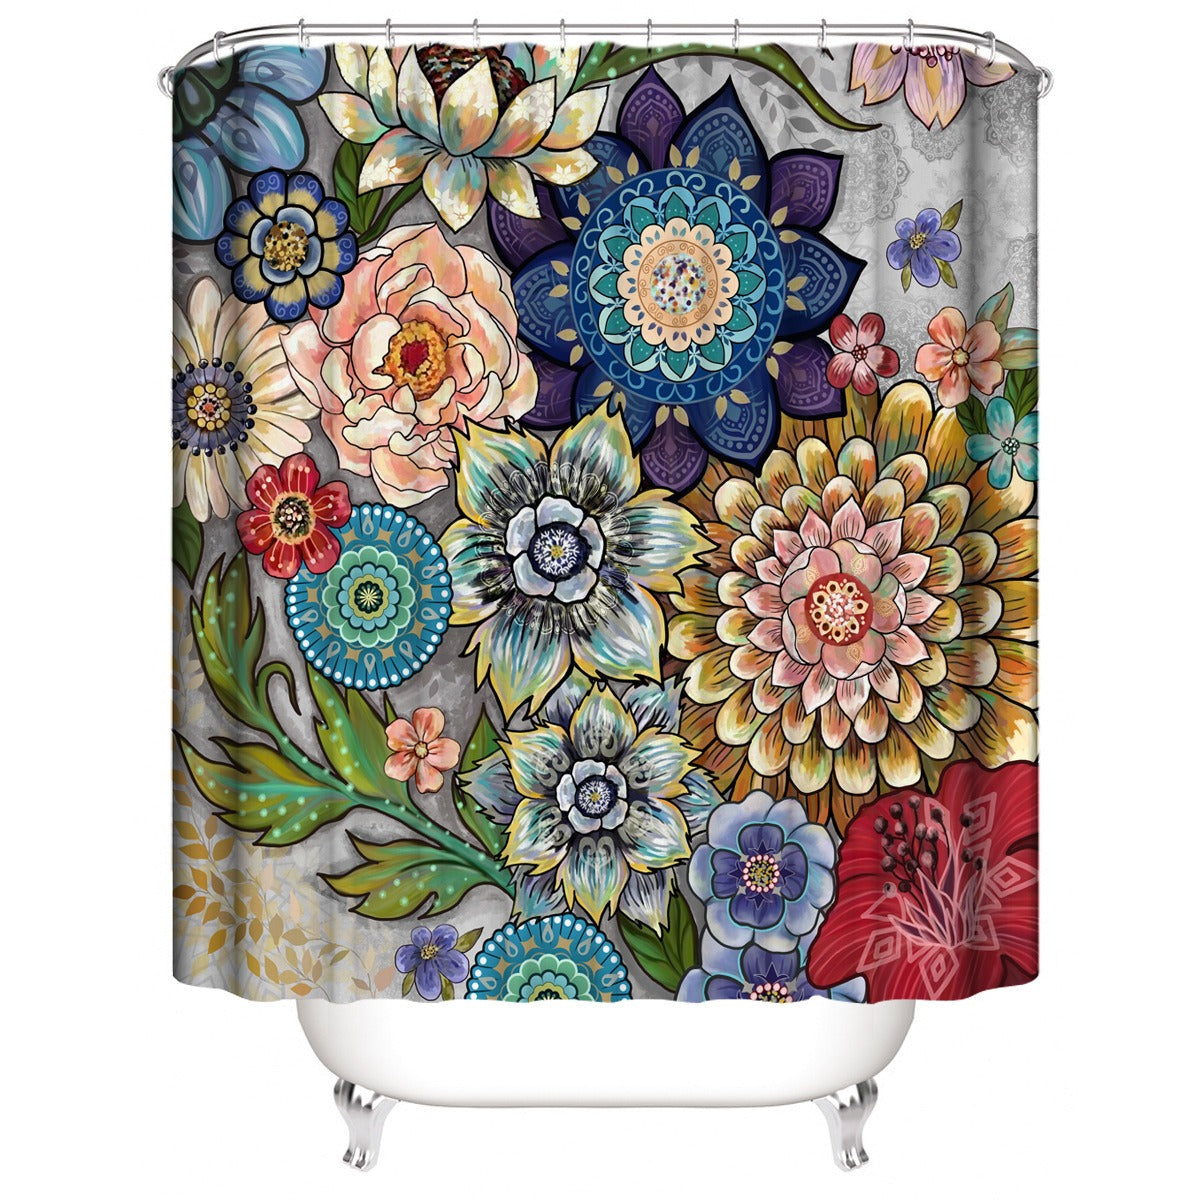 Waterproof and Mold Proof Shower Curtain